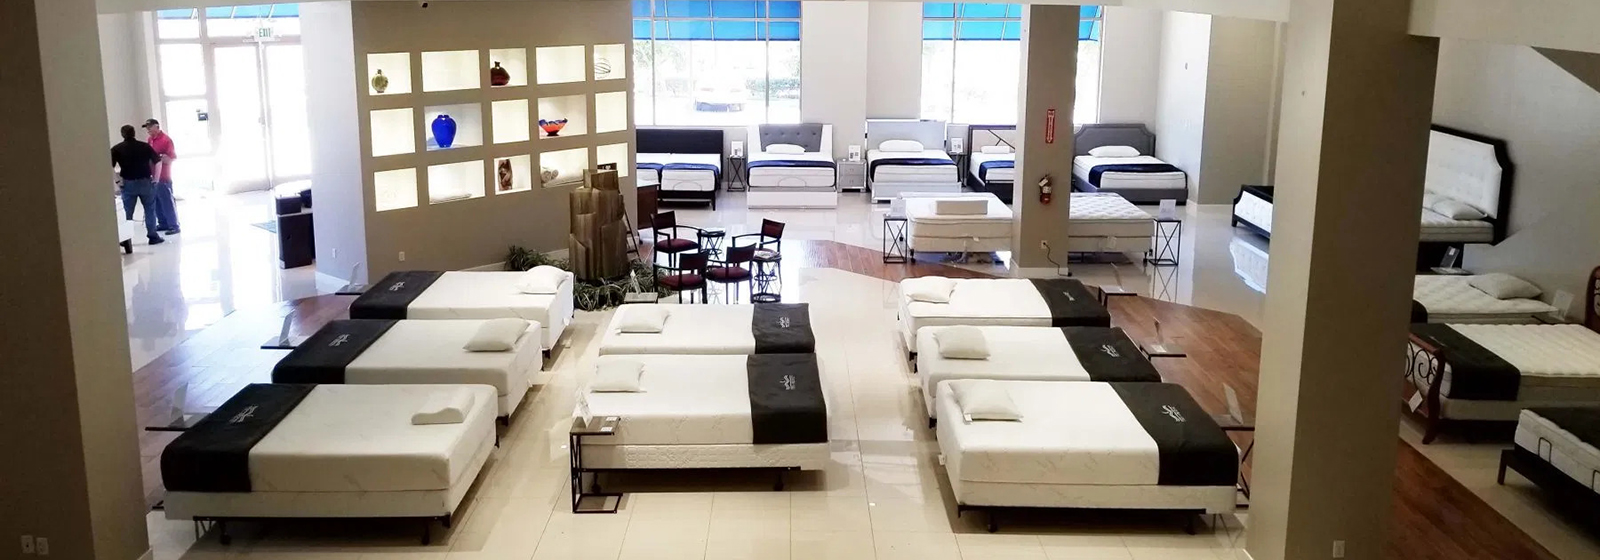 SelectABed Mattress Showroom Agoura Hills